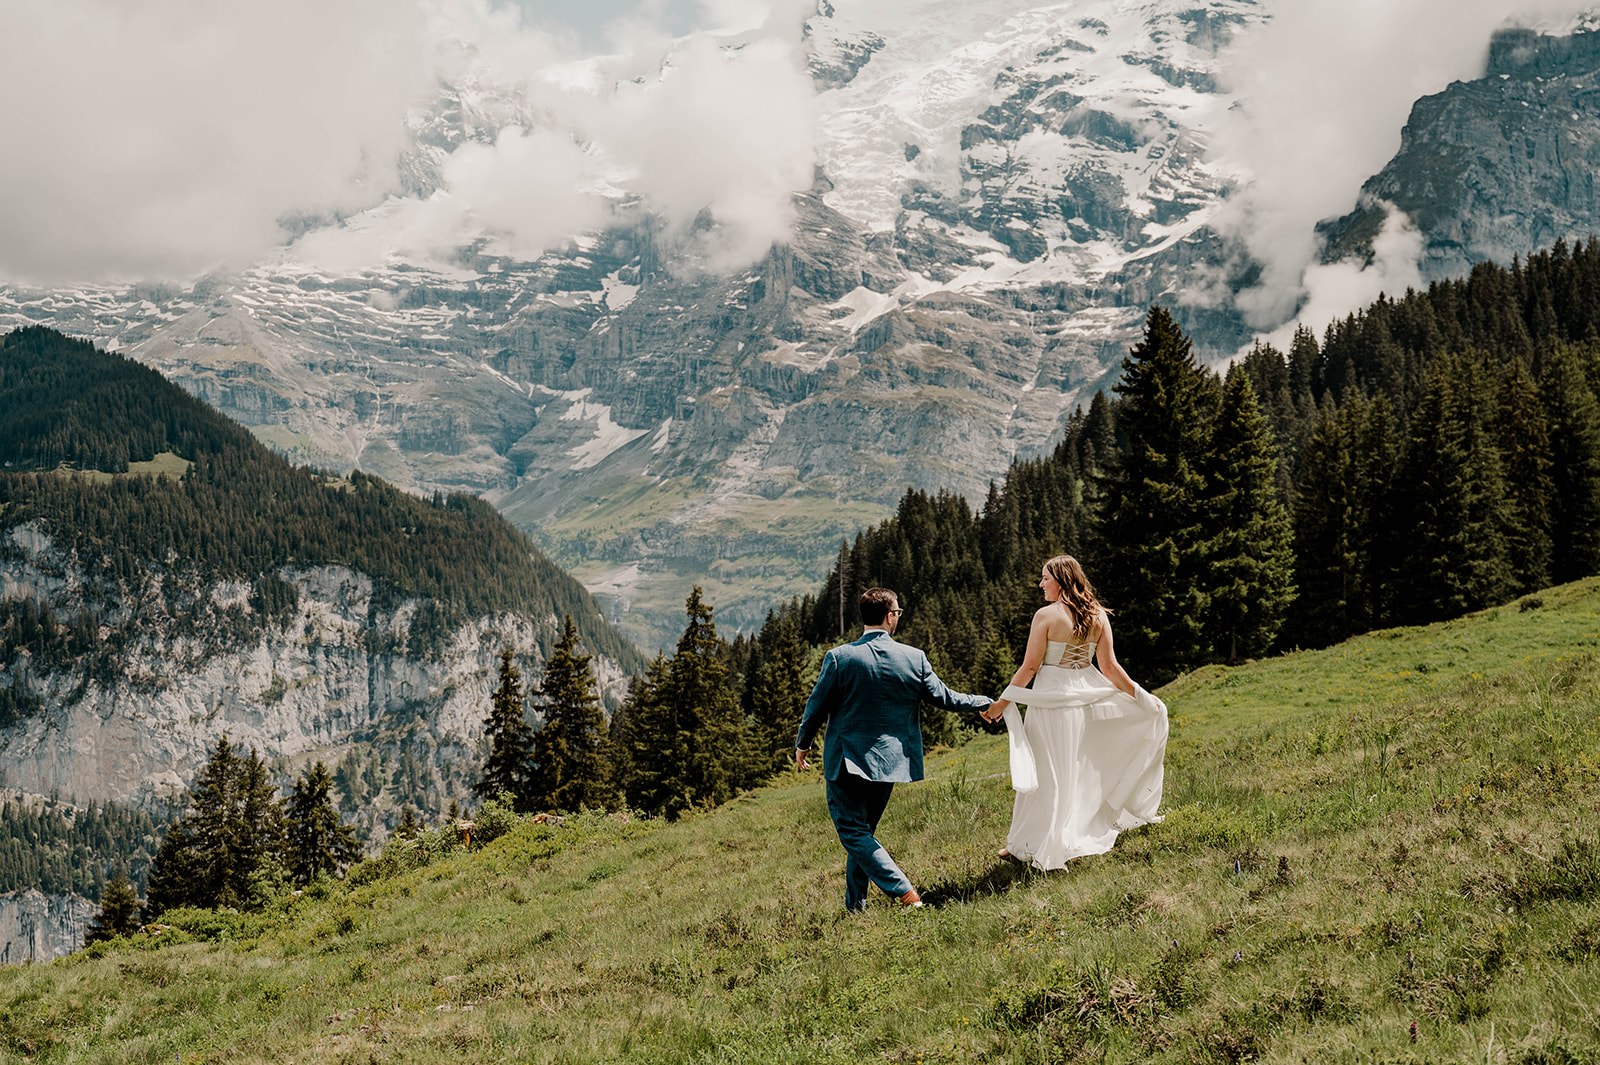 Mürren is the perfect backdrop to celebrate a couples love for life and adventure and joining together forever.